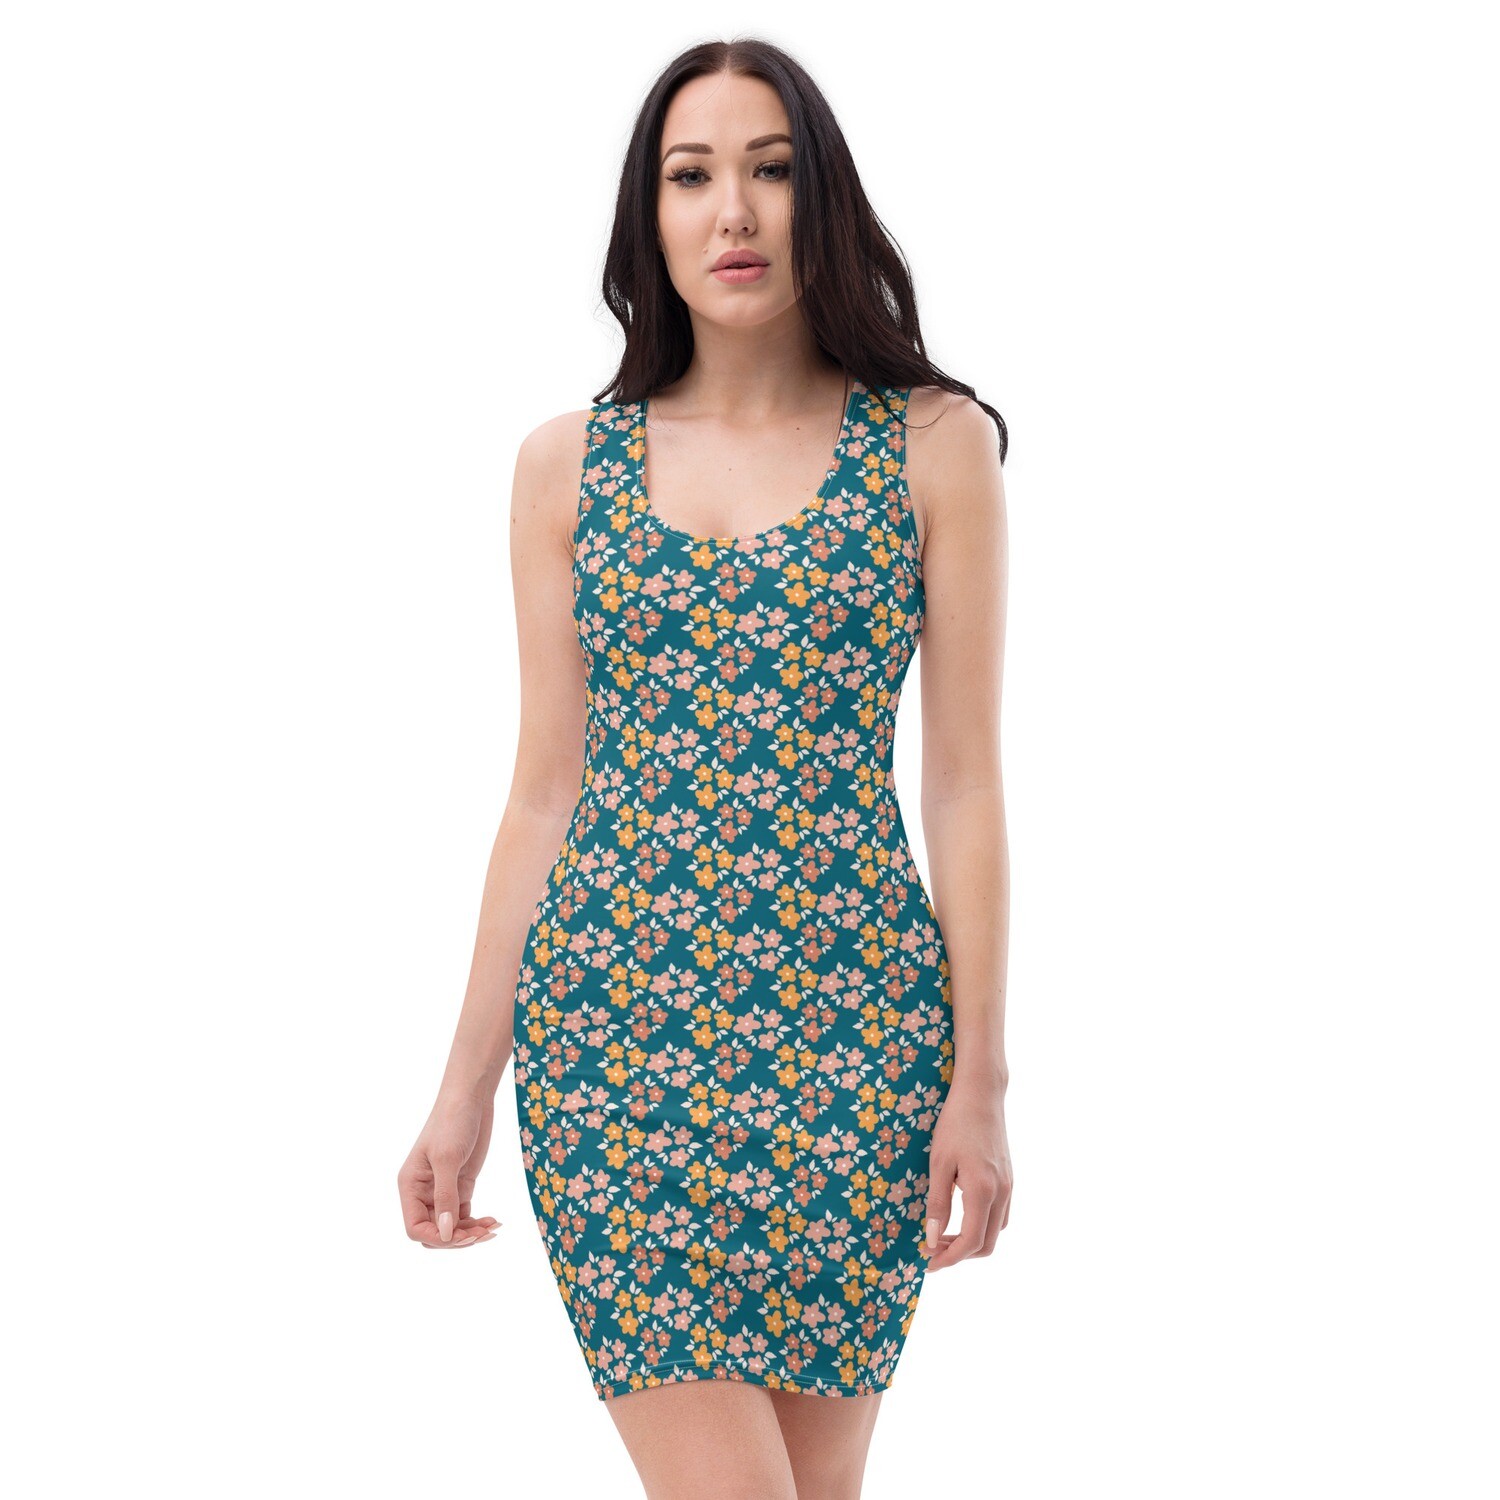 Dark turquoise bodycon dress with retro floral pattern